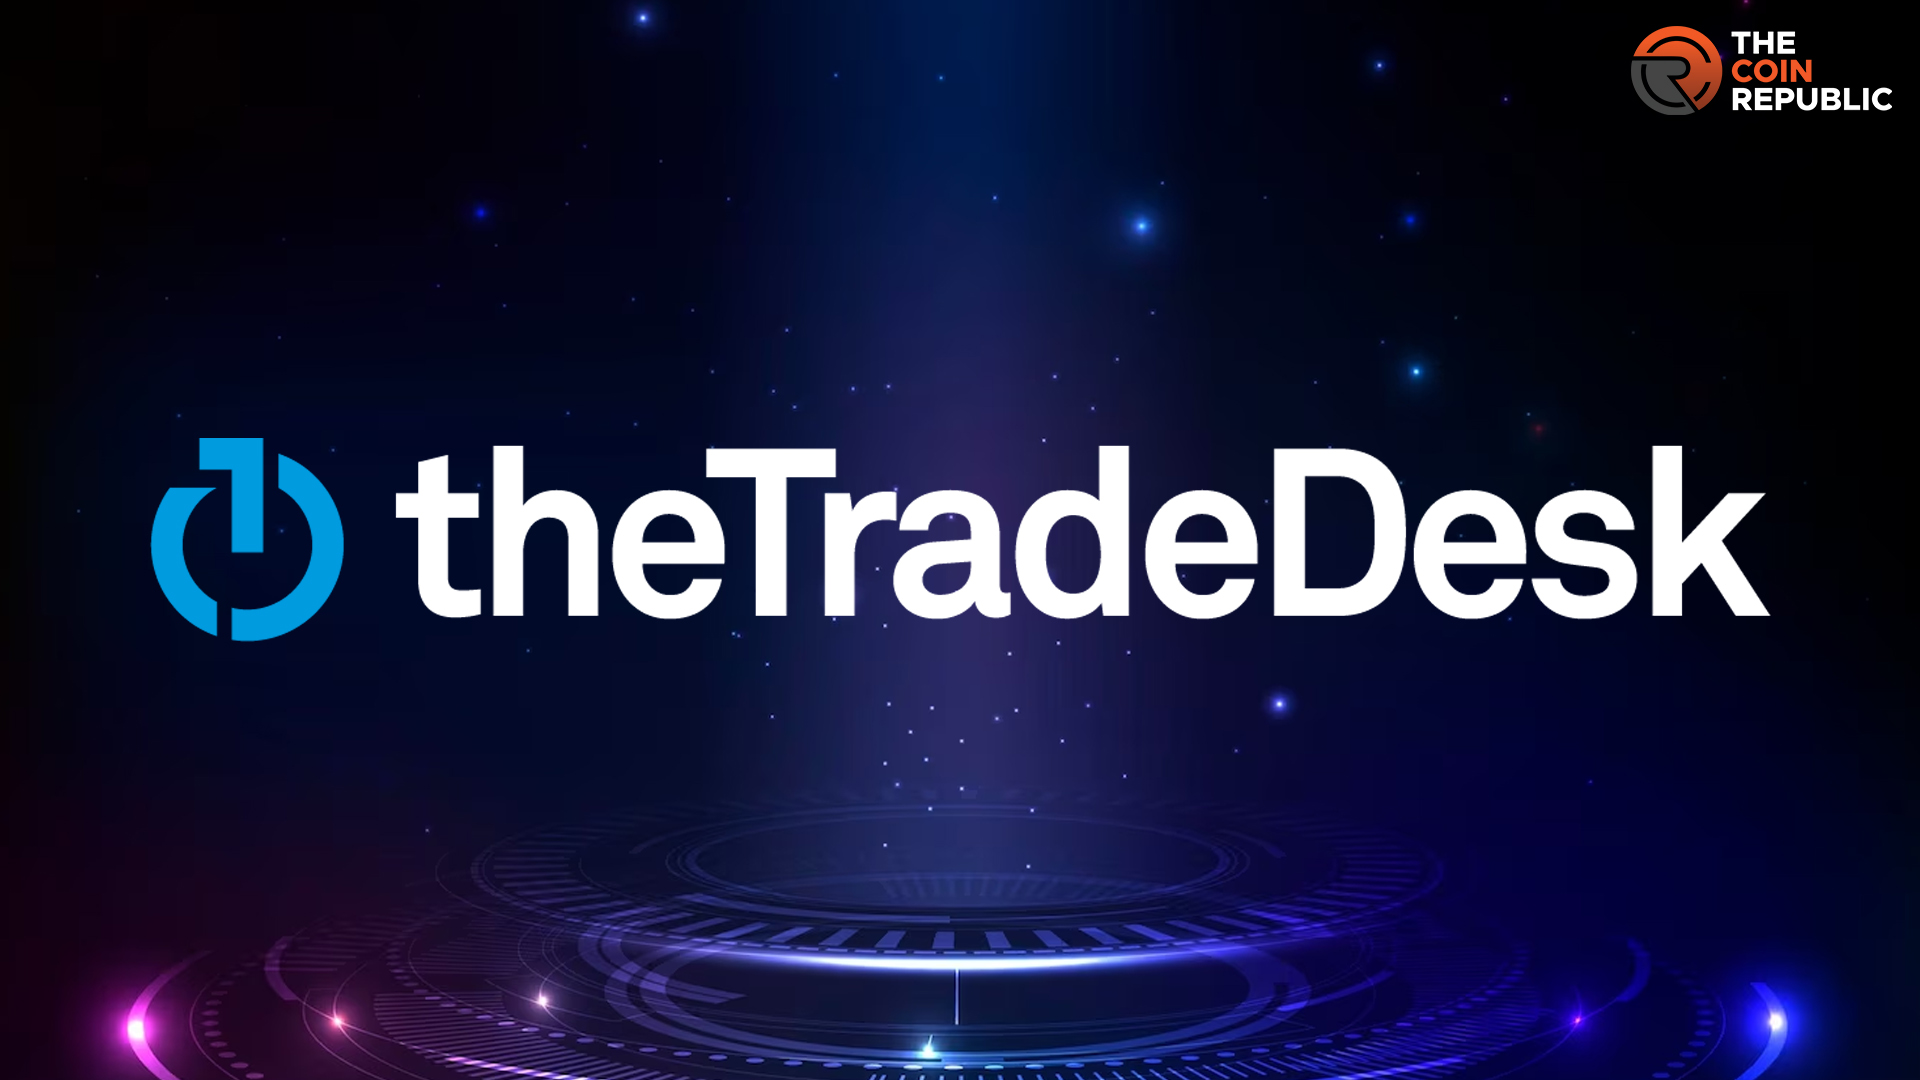 TTD Stock Price Up 5; Trade Desk Stock Prepares for New High?